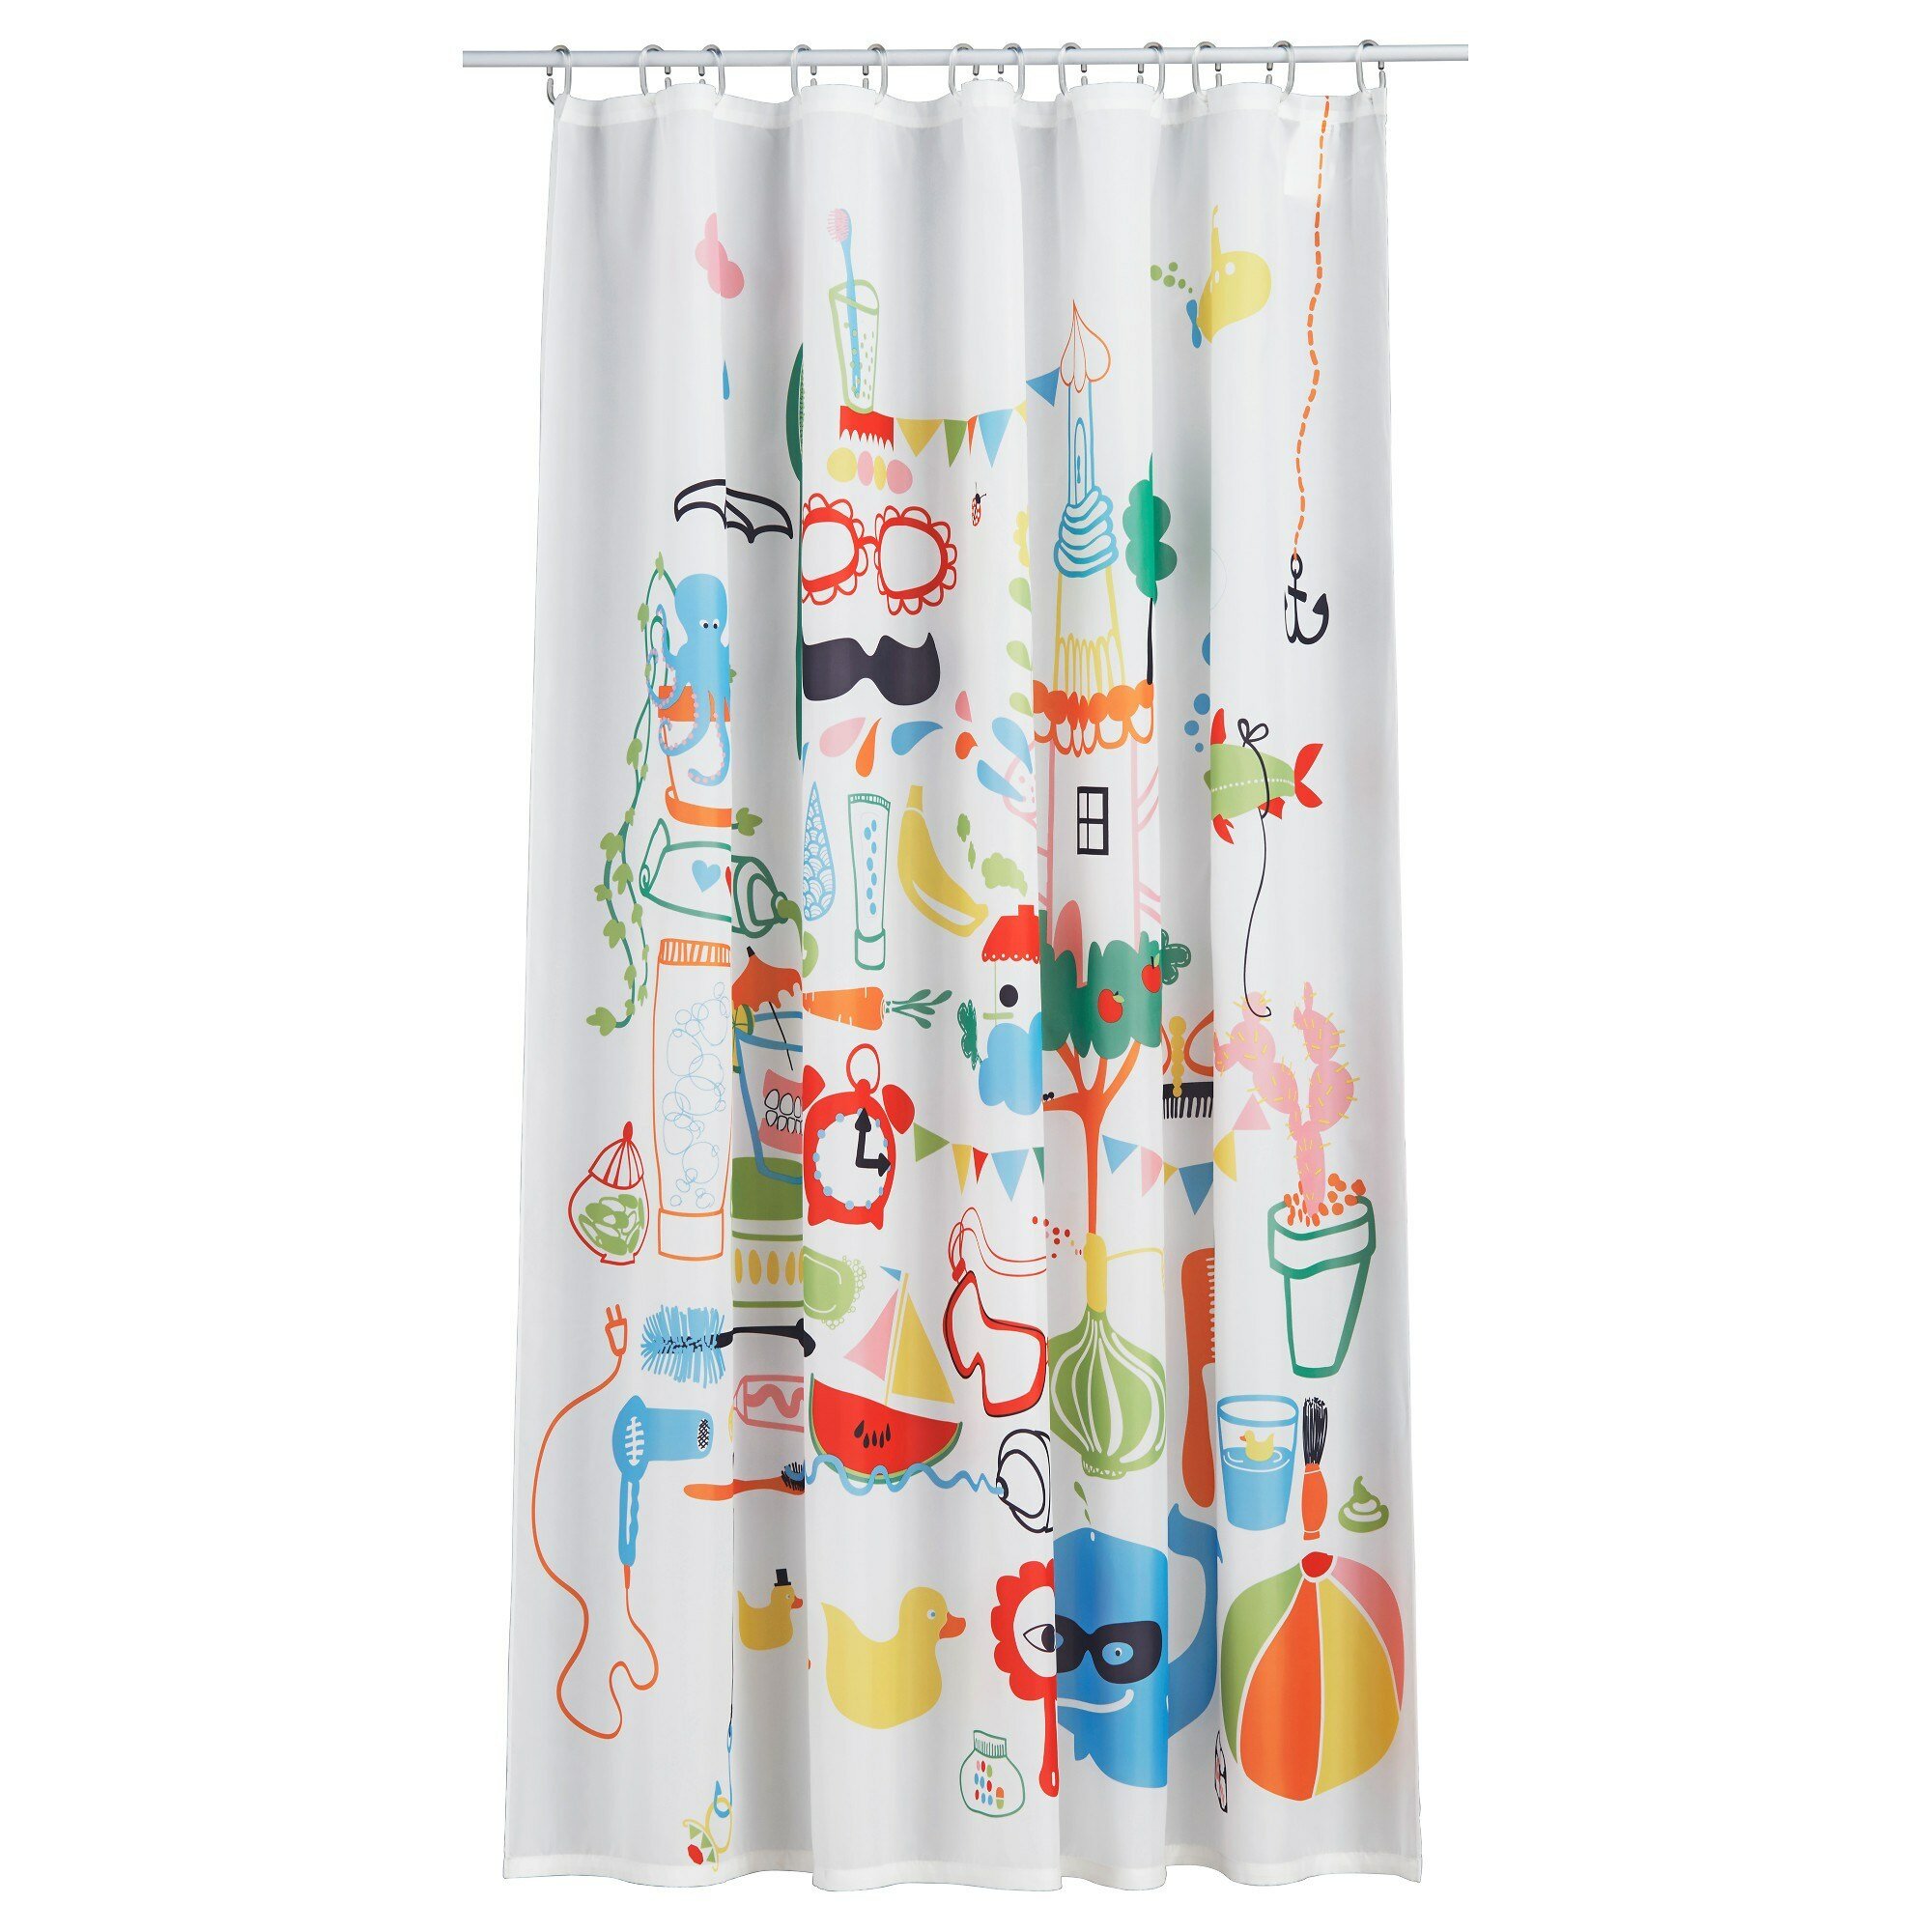 Ikea Shower Curtain for Best Your Bathroom Decoration: 84 Shower Curtain Fabric | Ikea Shower Curtain Hooks | Ikea Shower Curtain